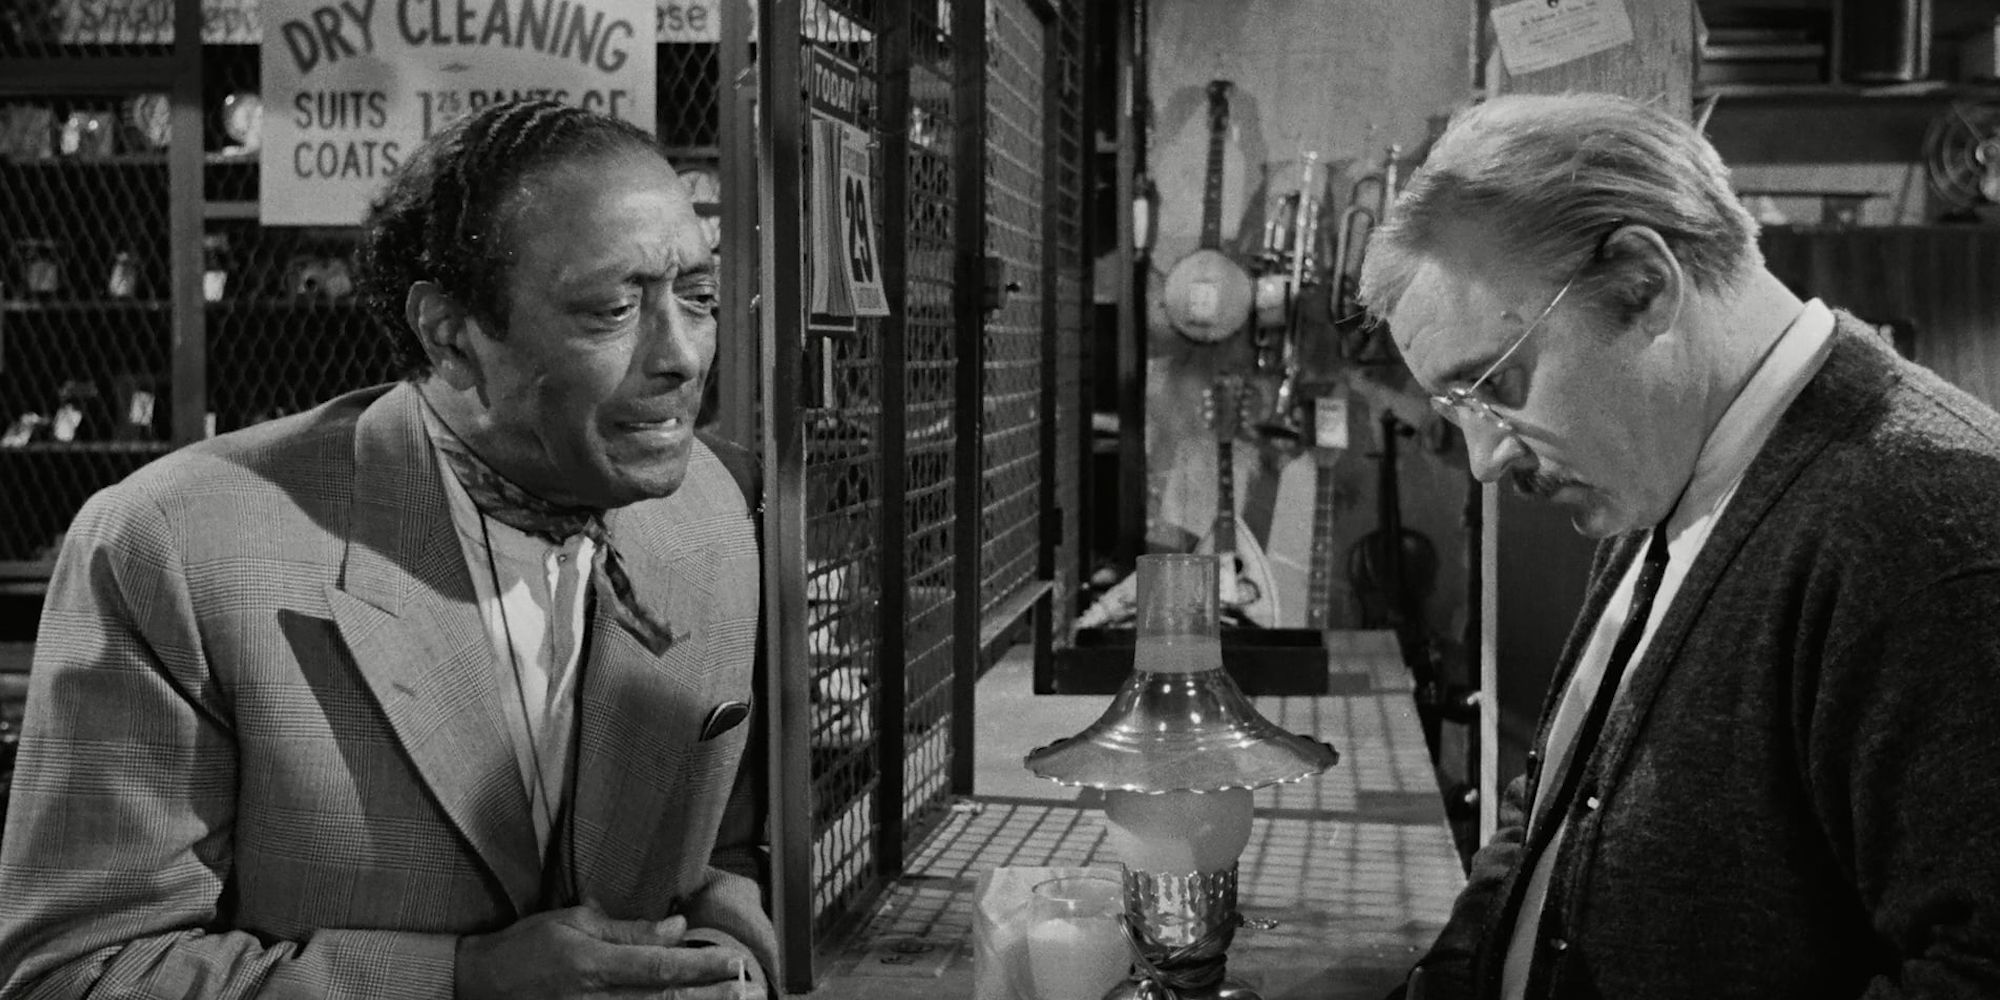 Two men talking over a store counter in the film The Pawnbroker